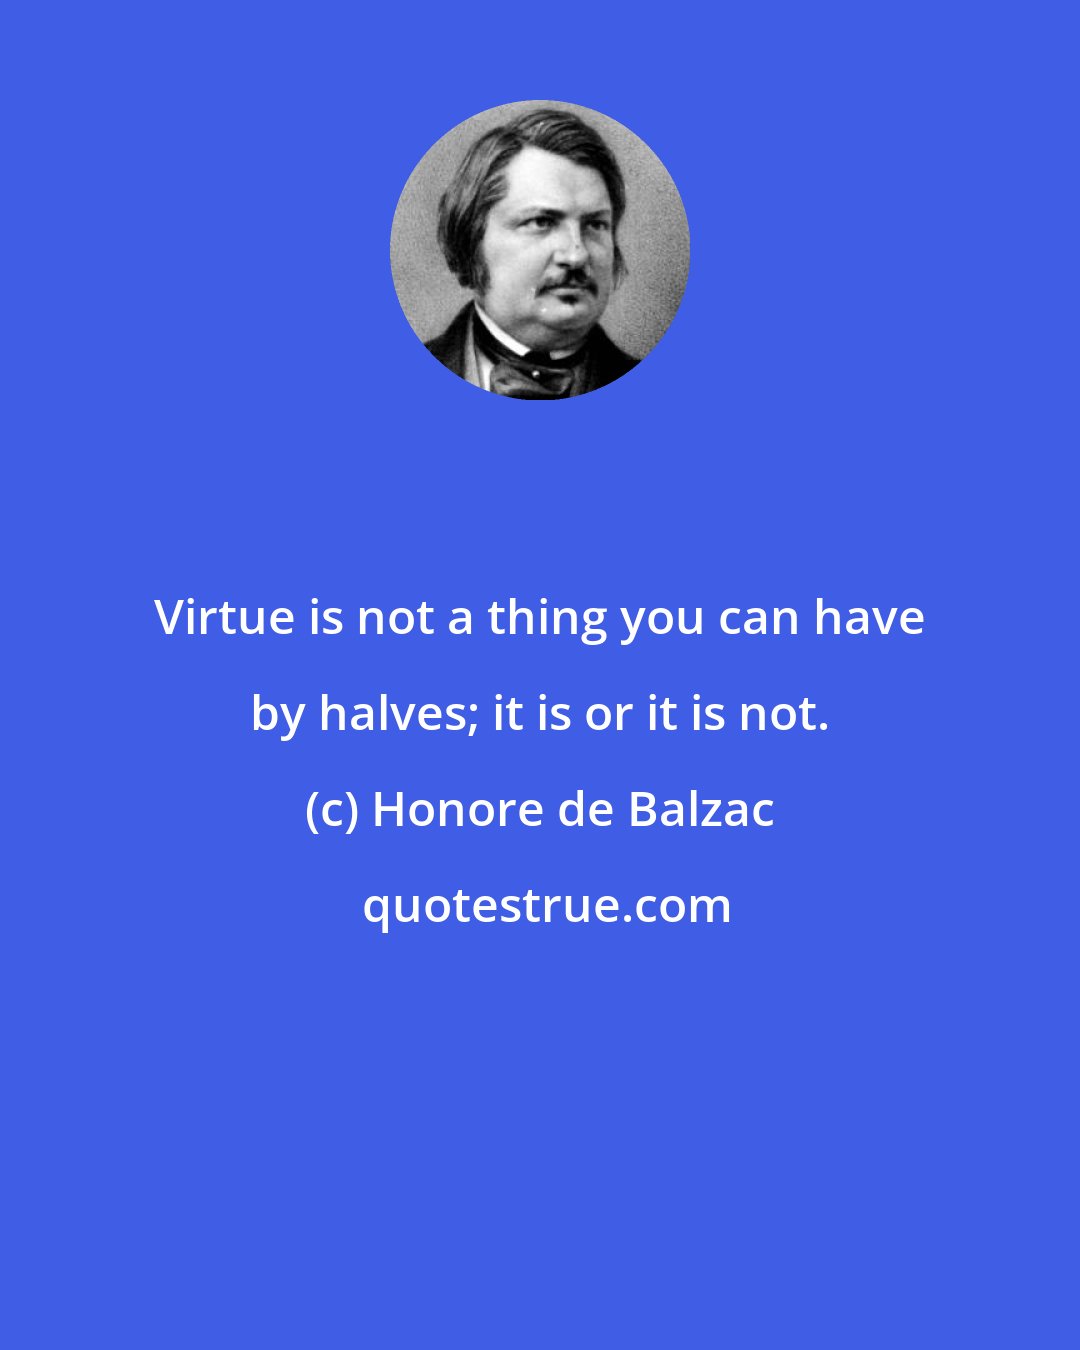 Honore de Balzac: Virtue is not a thing you can have by halves; it is or it is not.